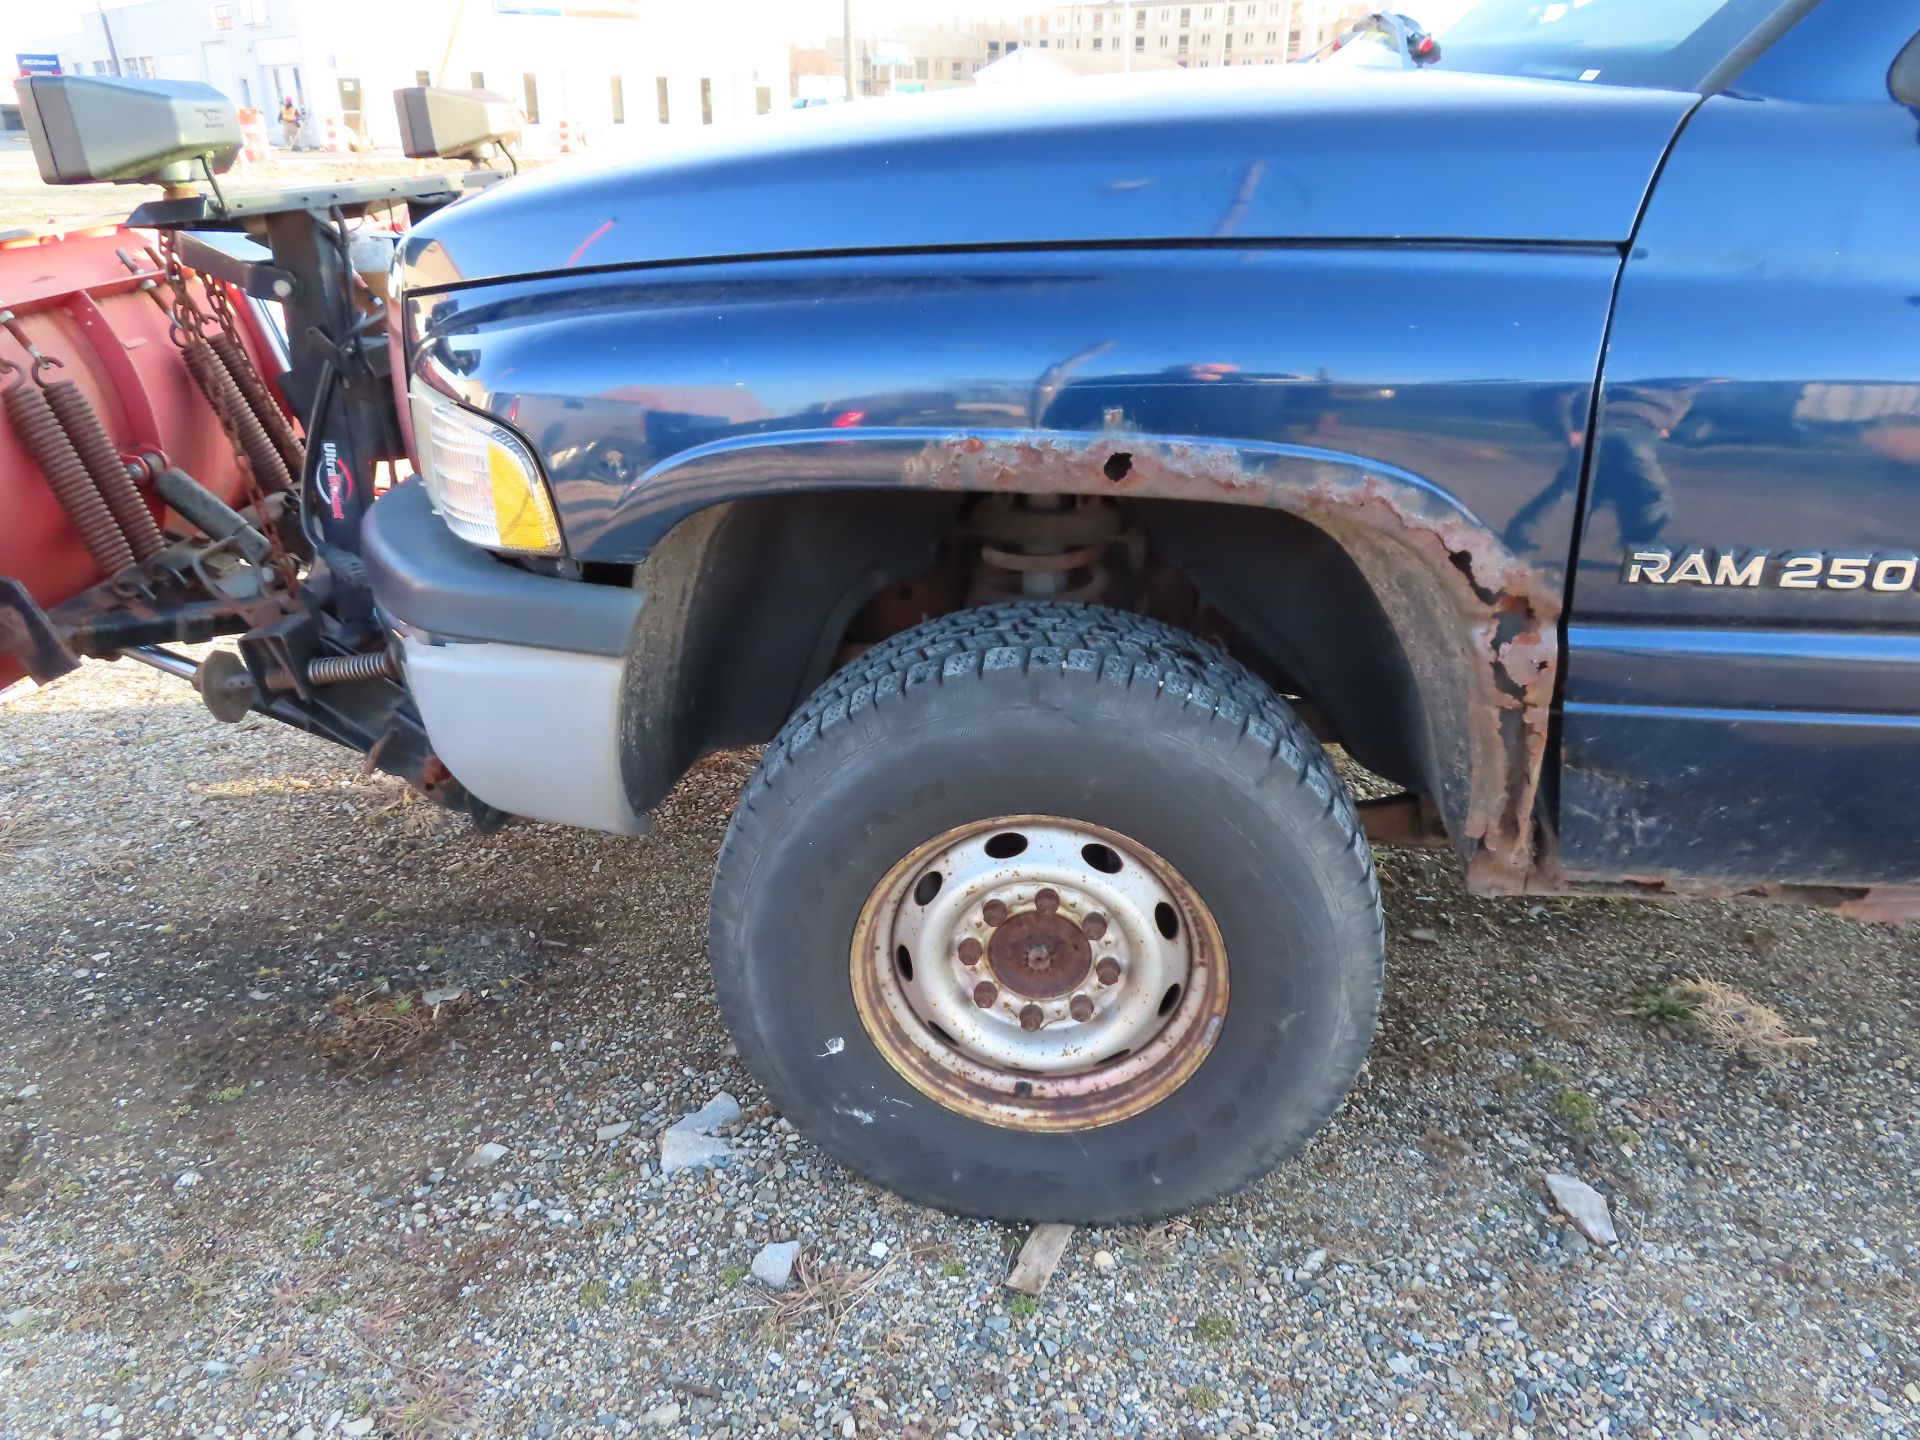 2002 Dodge Ram 2500 plow truck VIN 3B7KF26Z32M309373, 4wd, includes western plow with ultra-mount - Image 2 of 18